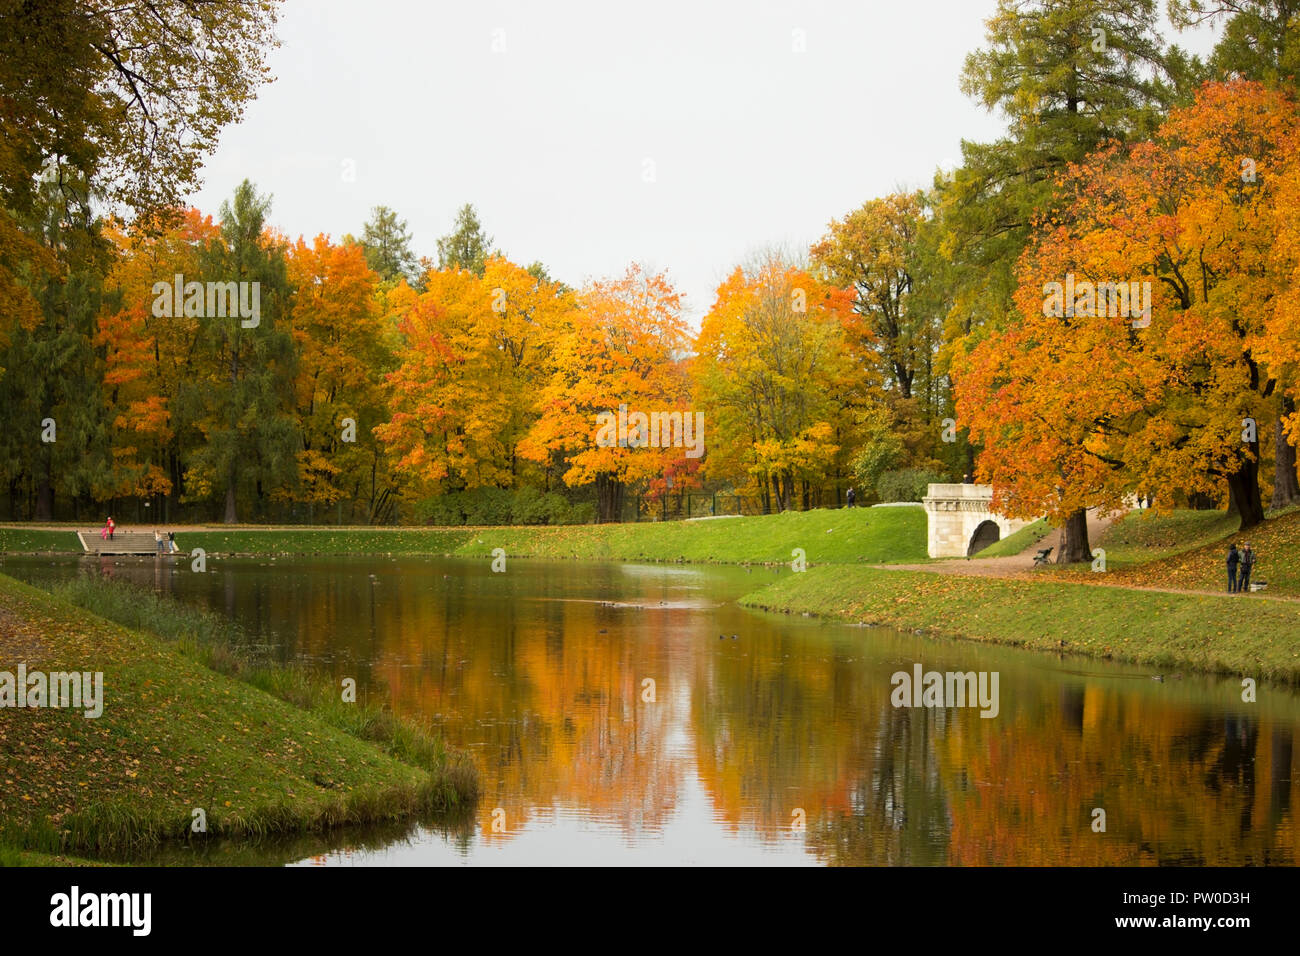 Autumn Gatchina Park with yellow foliage on trees and Karpin Pond, in which they are reflected Stock Photo